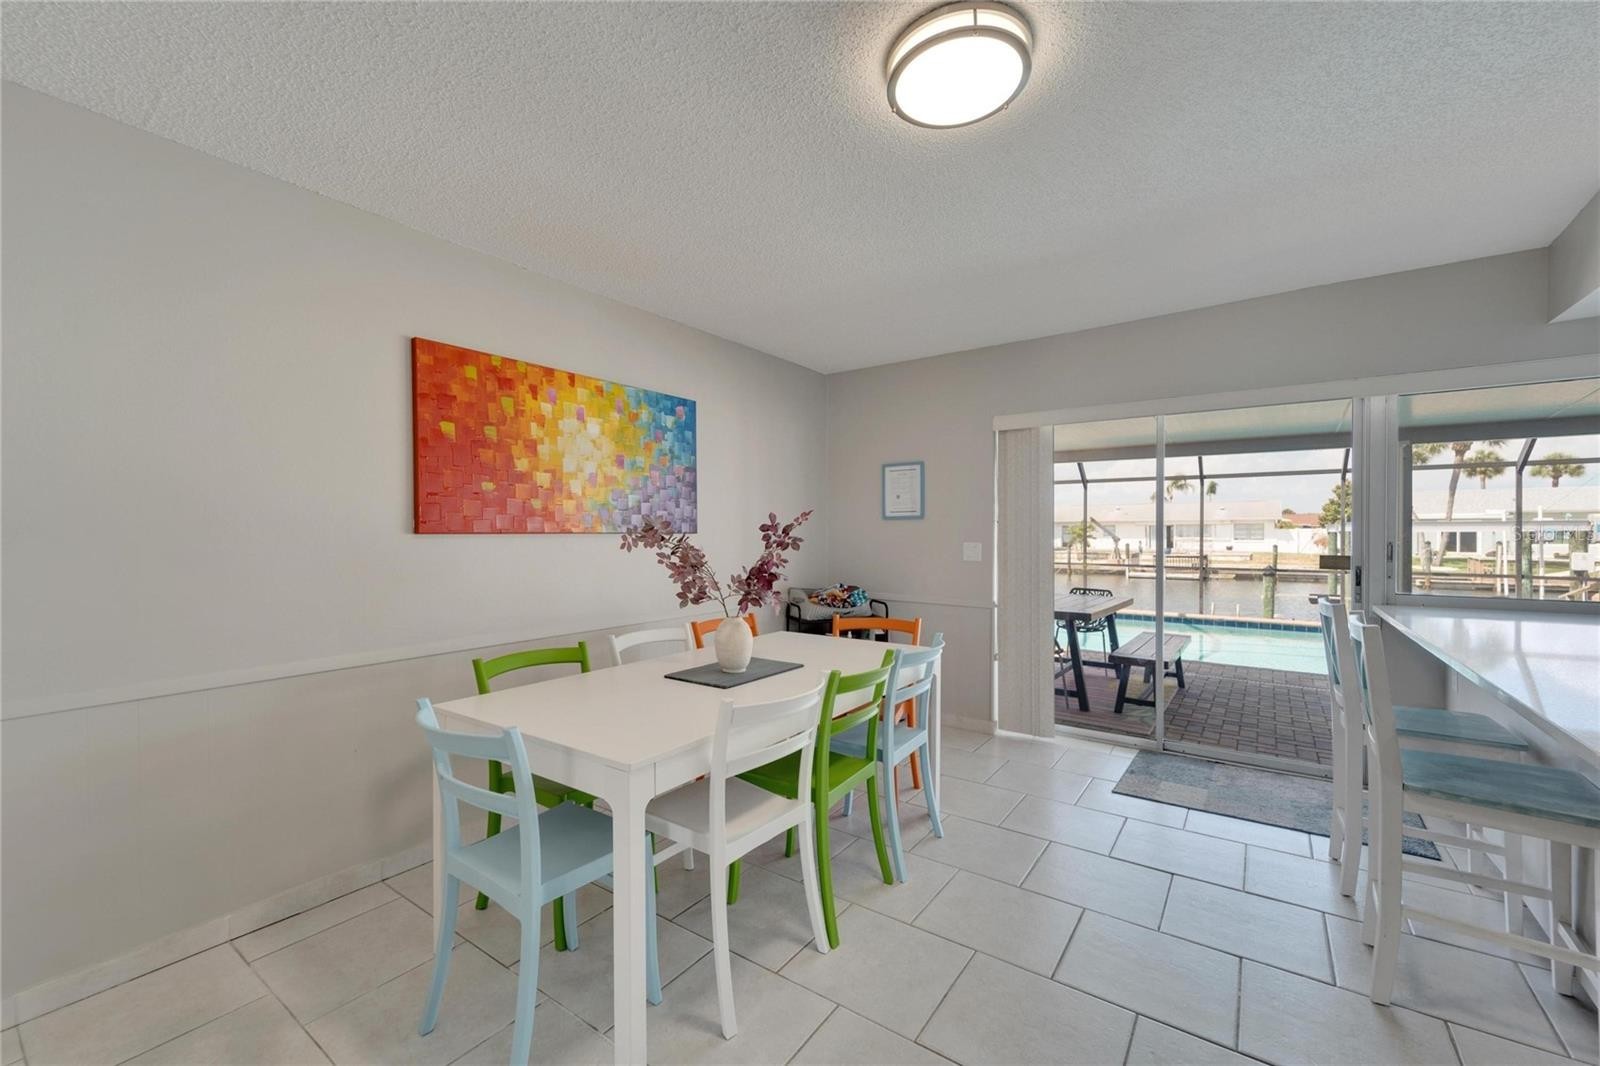 42. 1011 Spindle Palm Way